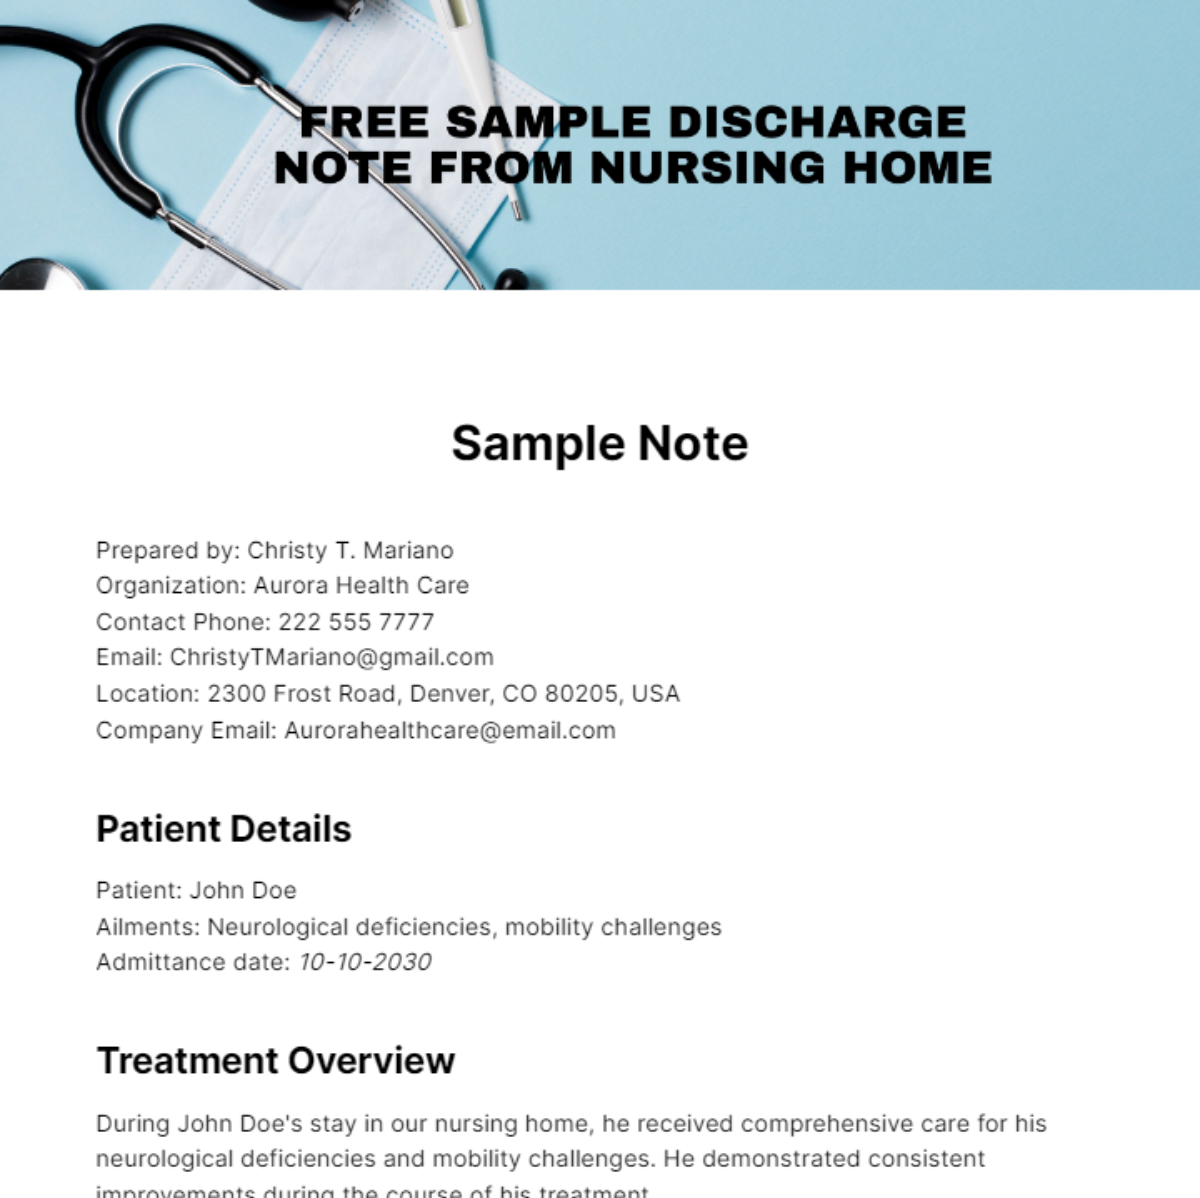 Sample Discharge Note from Nursing Home Template